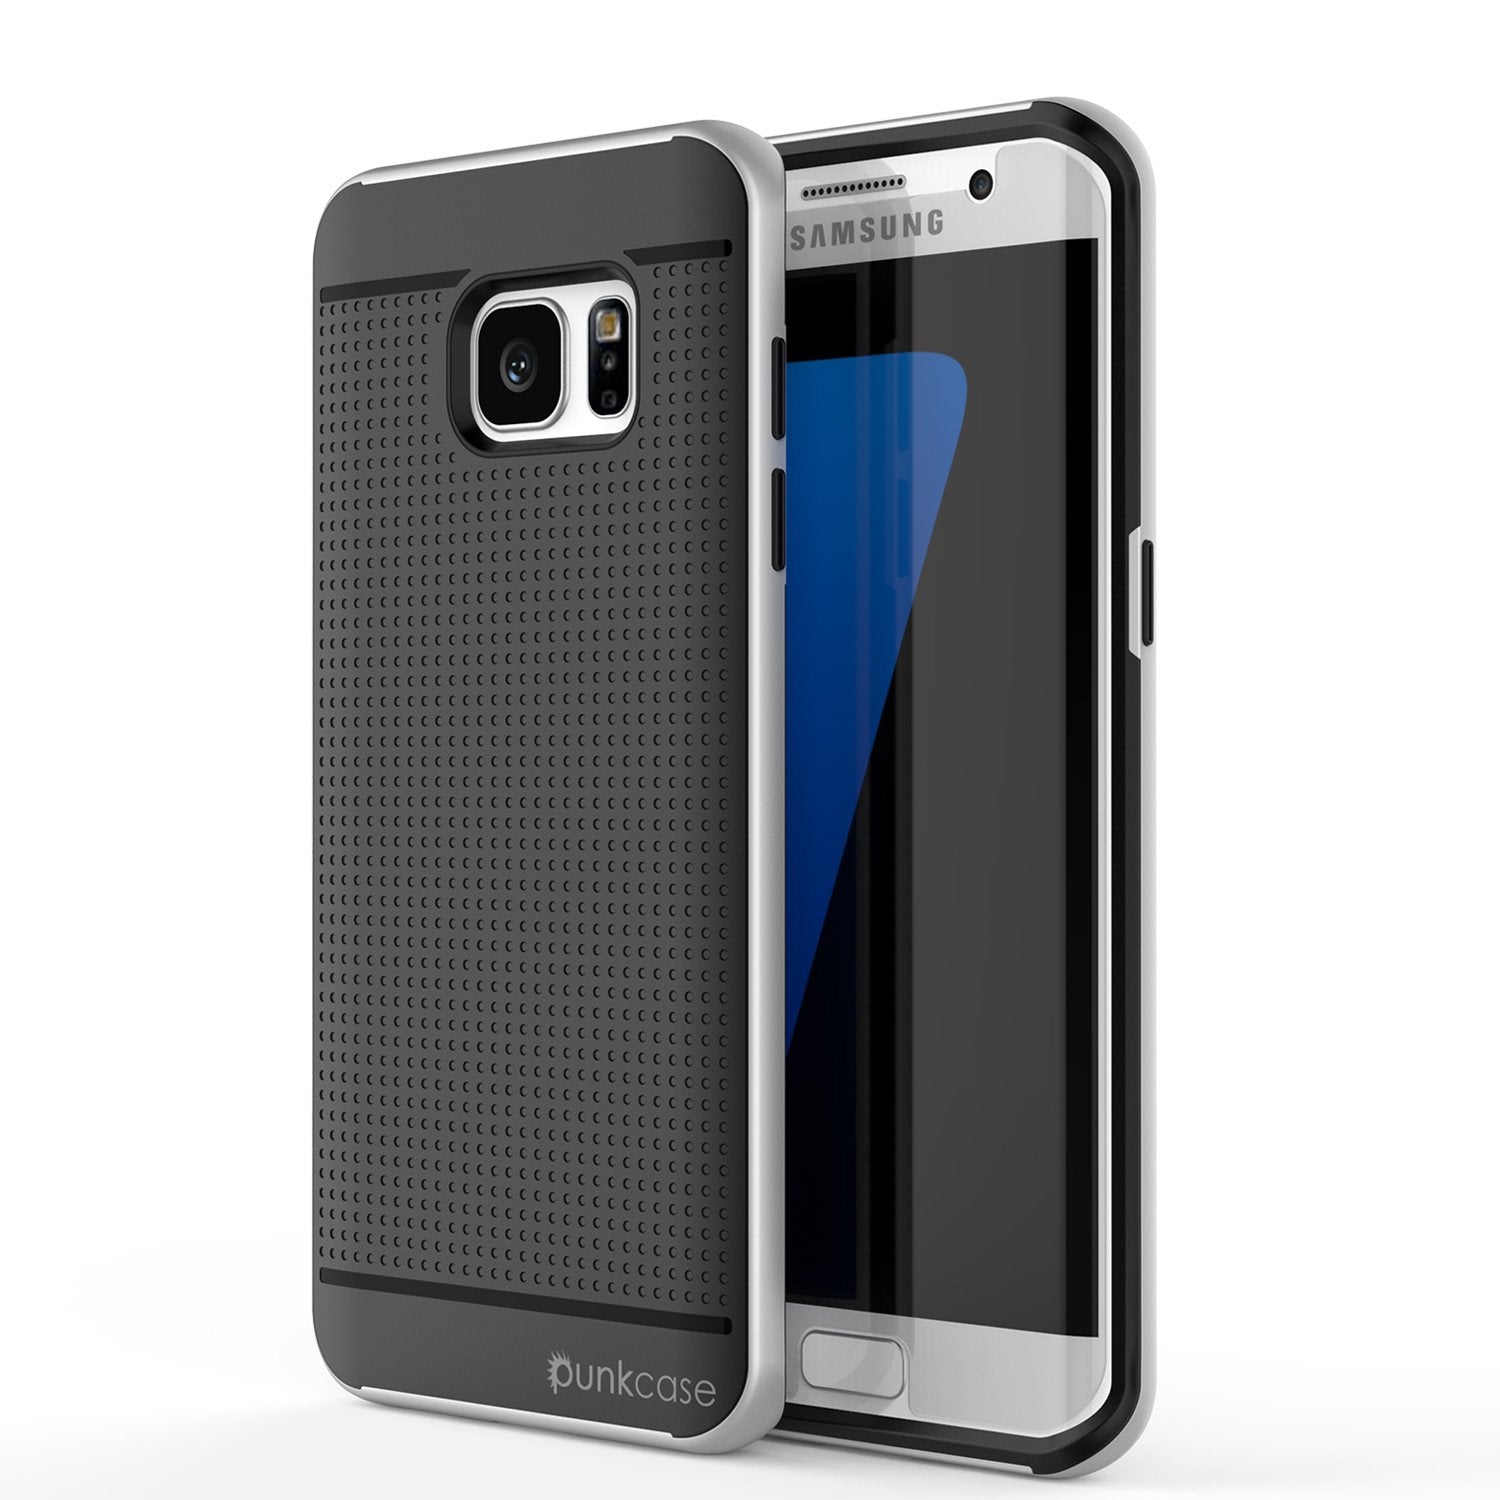 Galaxy S7 Edge Case, PunkCase STEALTH Silver Series Hybrid 3-Piece Shockproof Dual Layer Cover